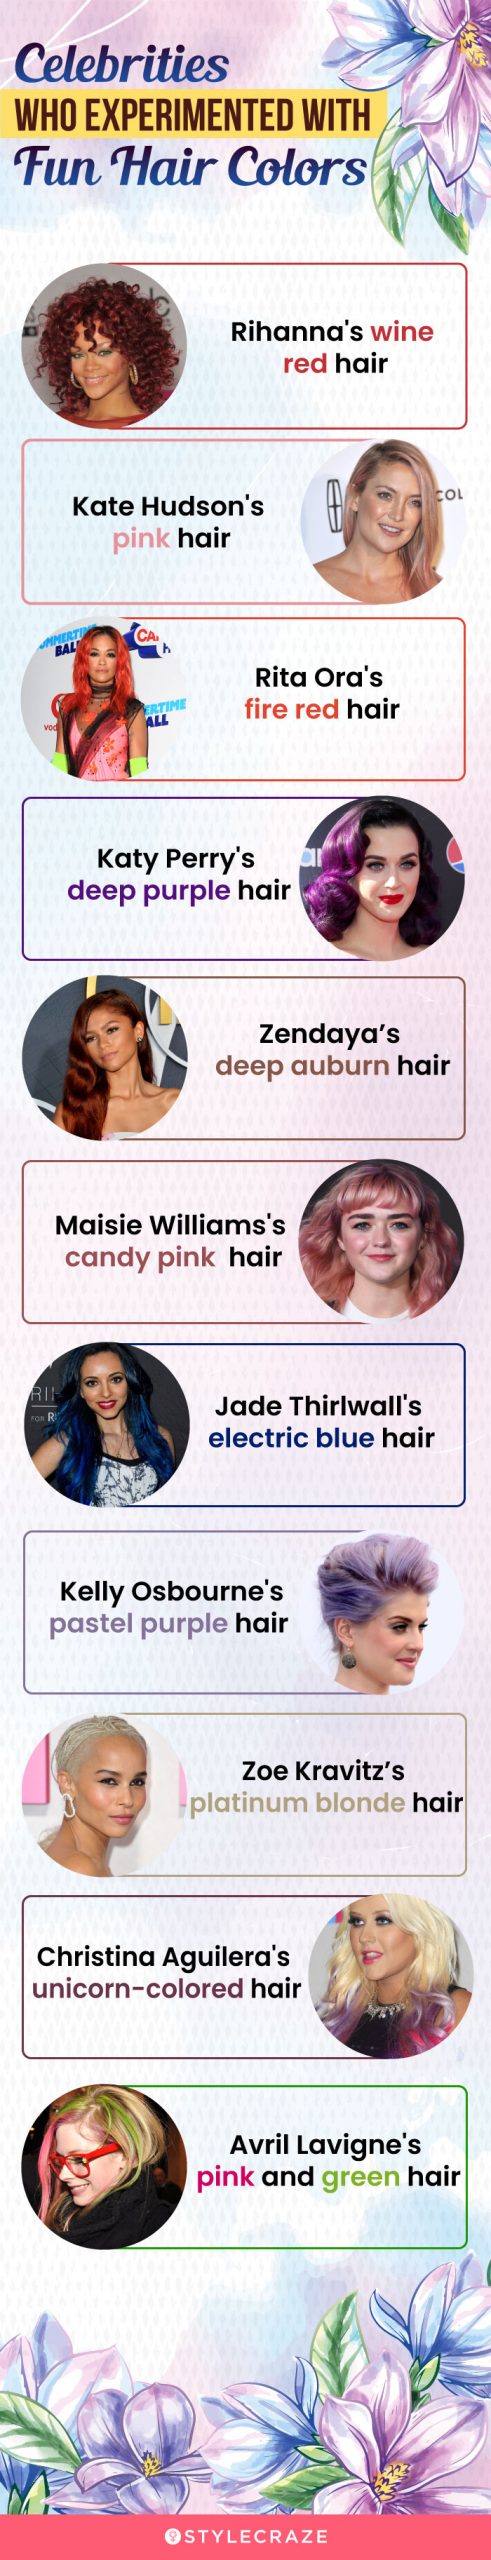 celebrities who experimented with fun hair colors (infographic)